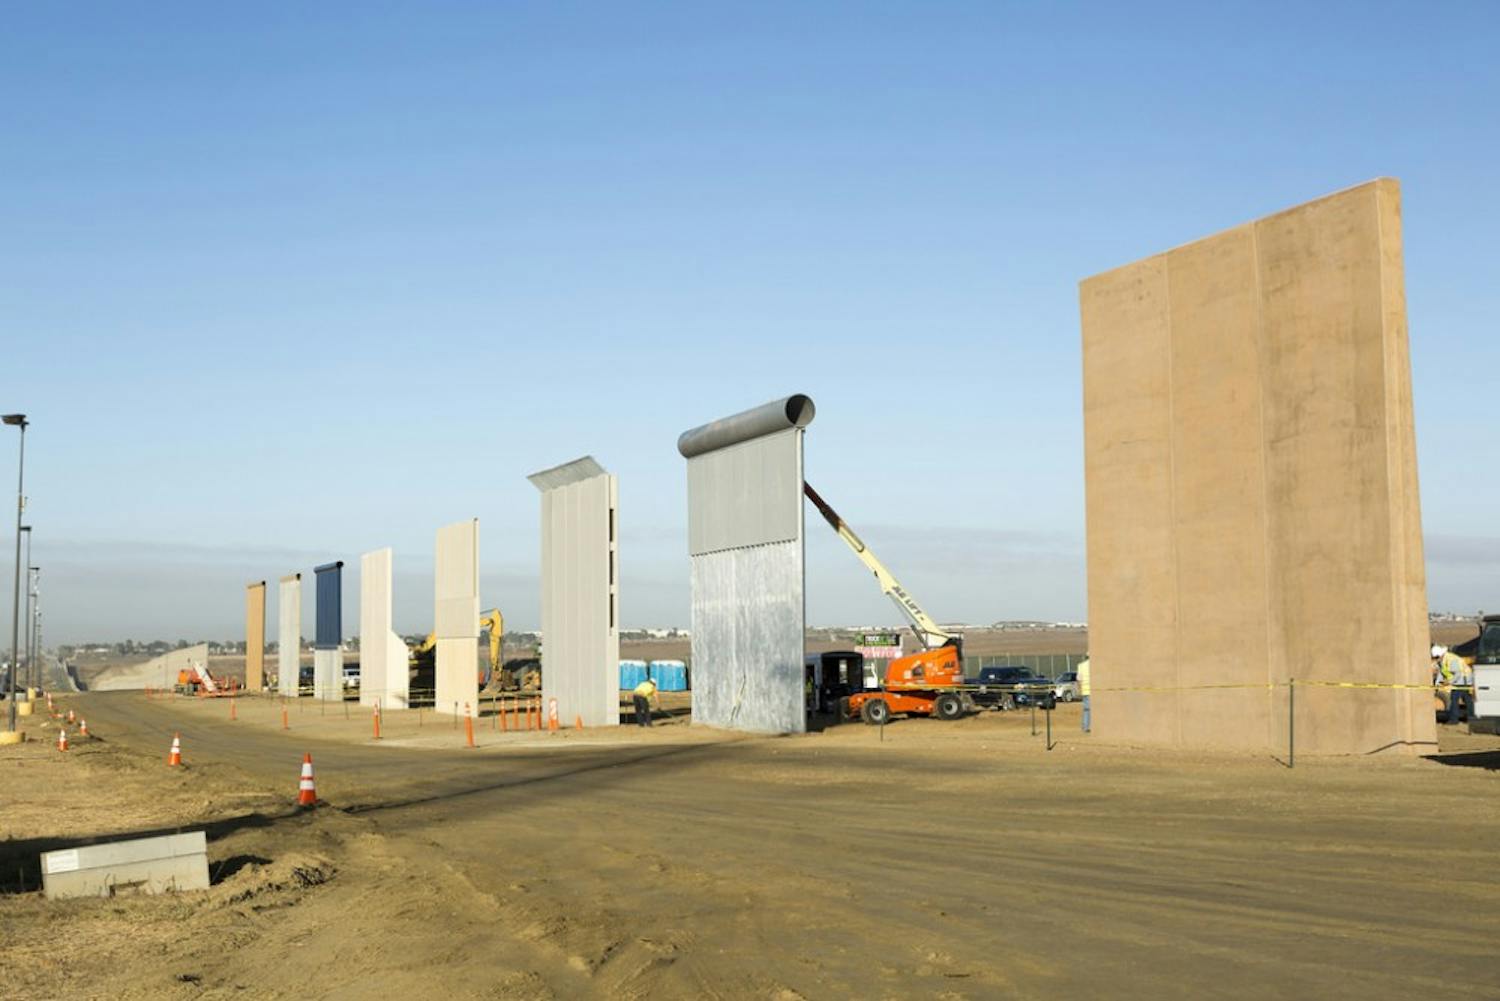 Prototypes of a southern border wall